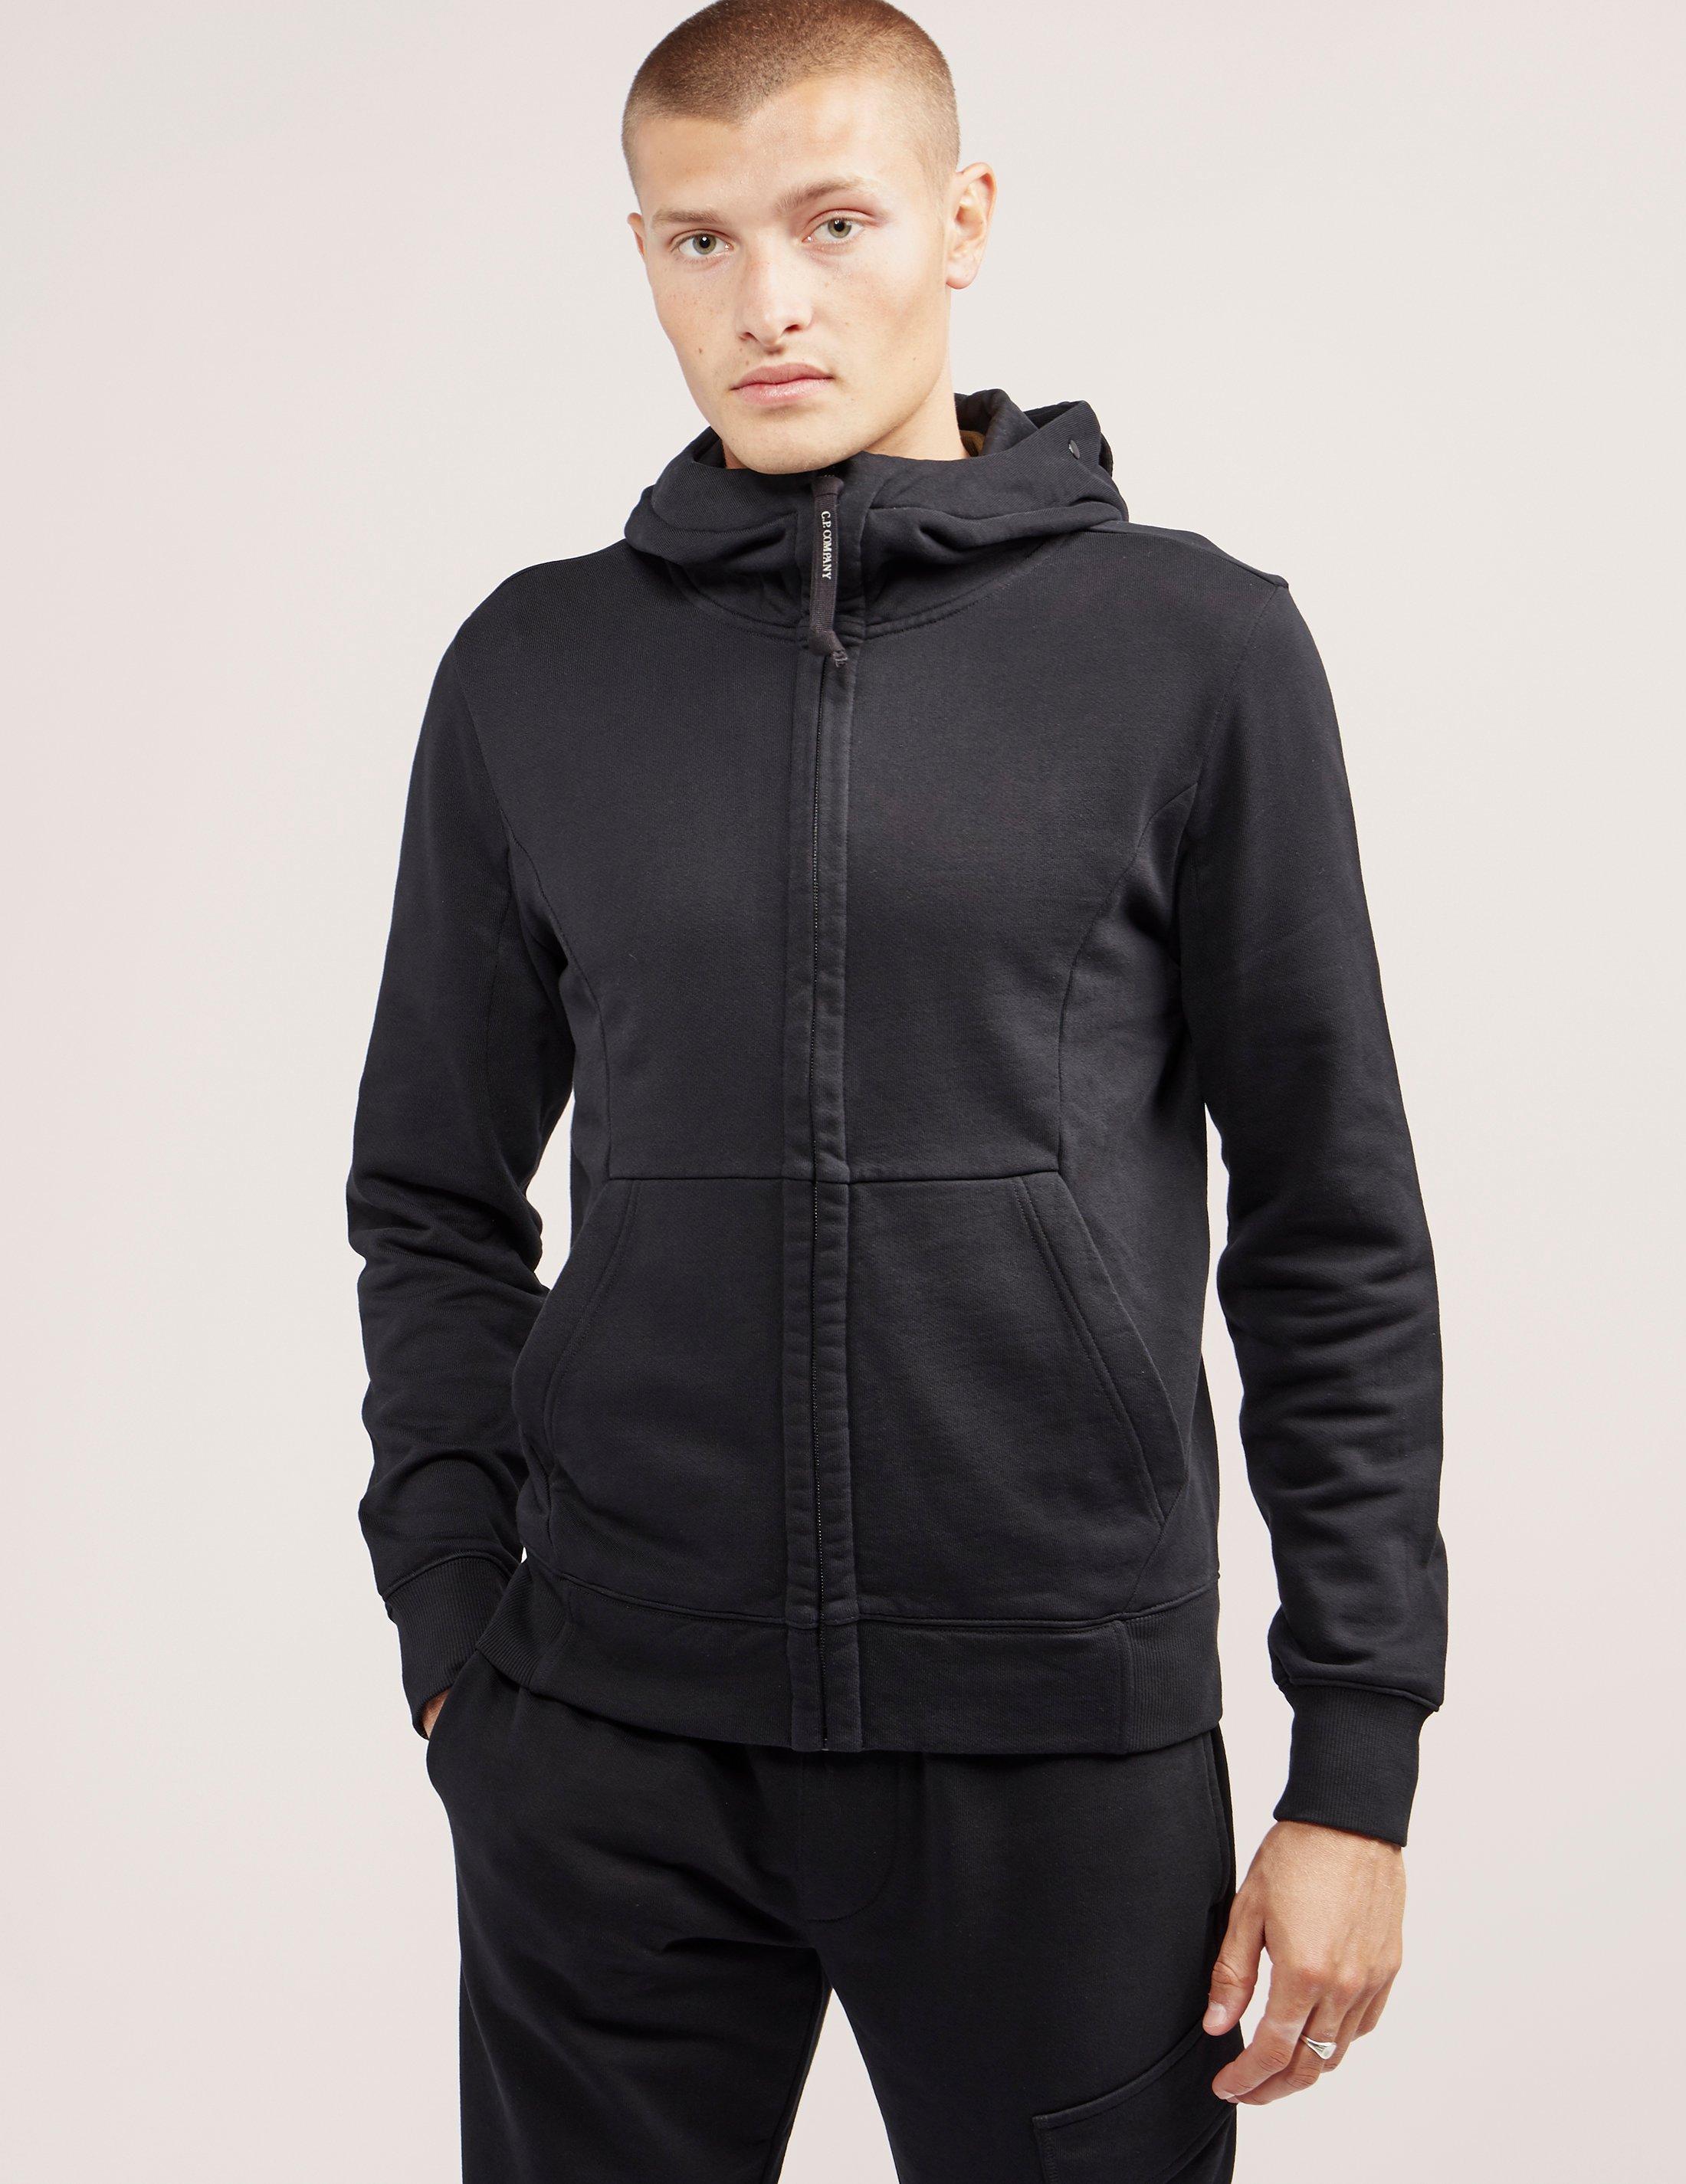 C.P. Company Goggle Full Zip Hoodie in Black for Men | Lyst